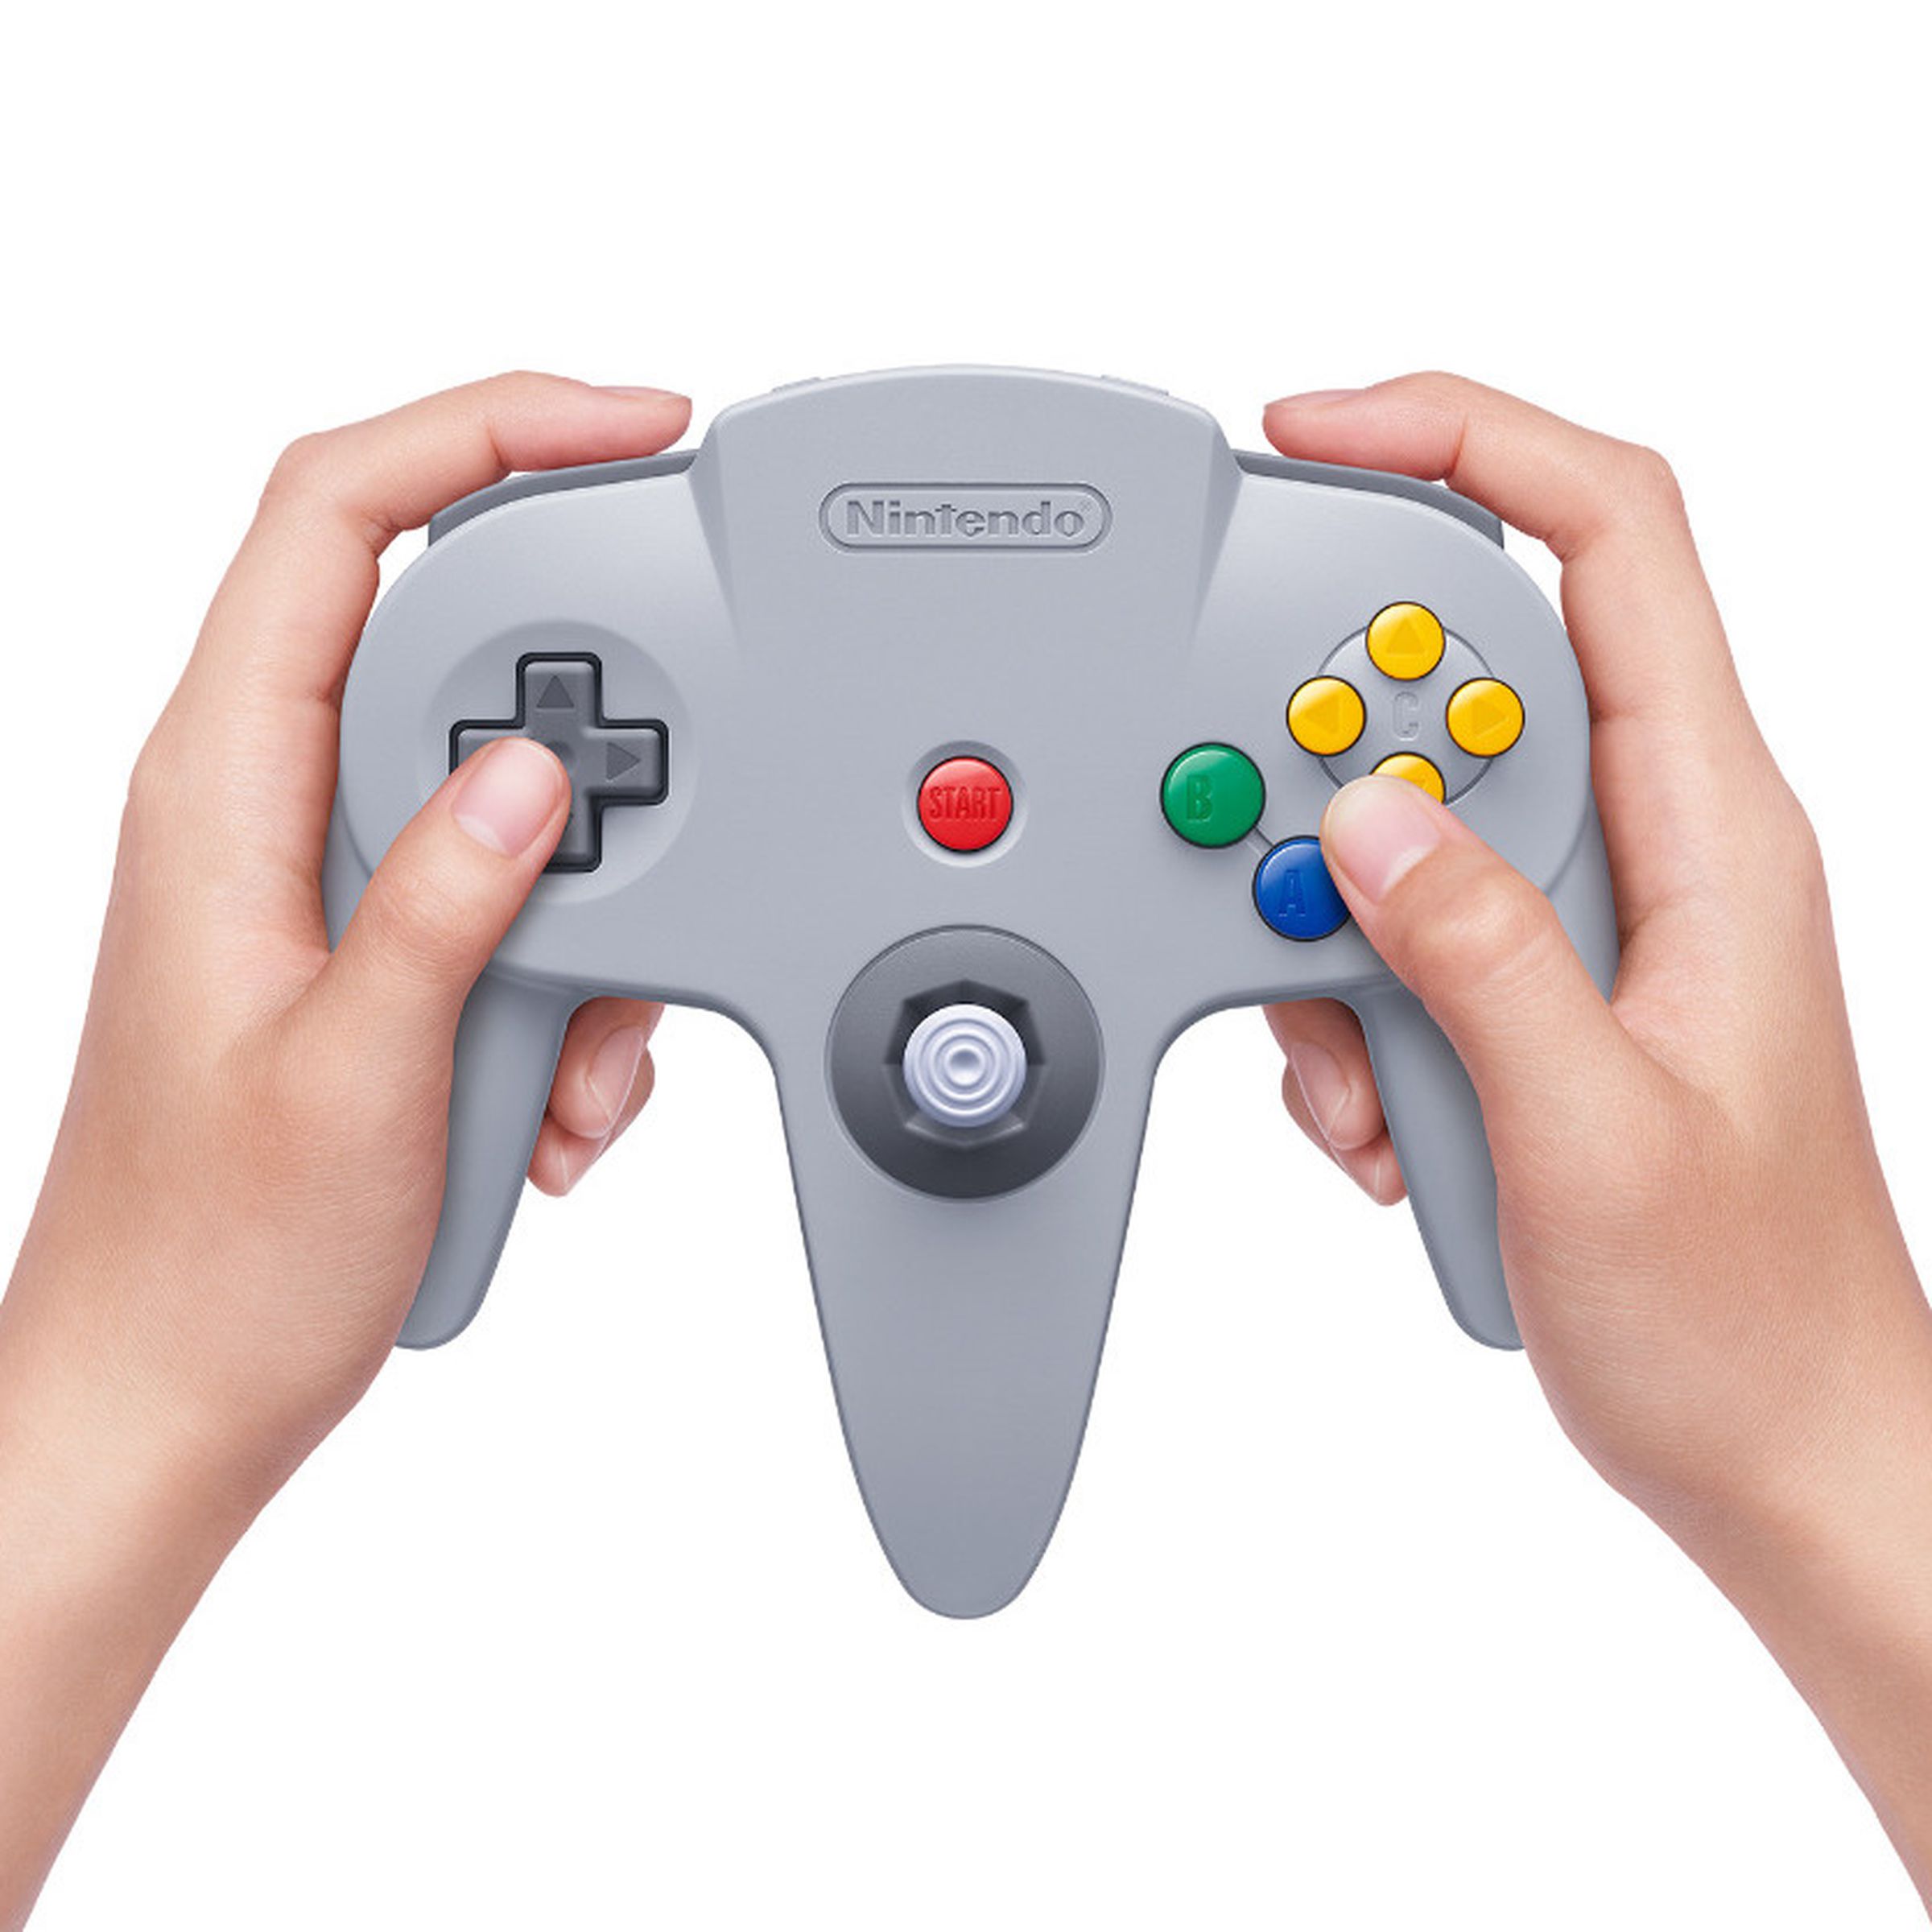 A stock photo of the N64 controller for the Nintendo Switch